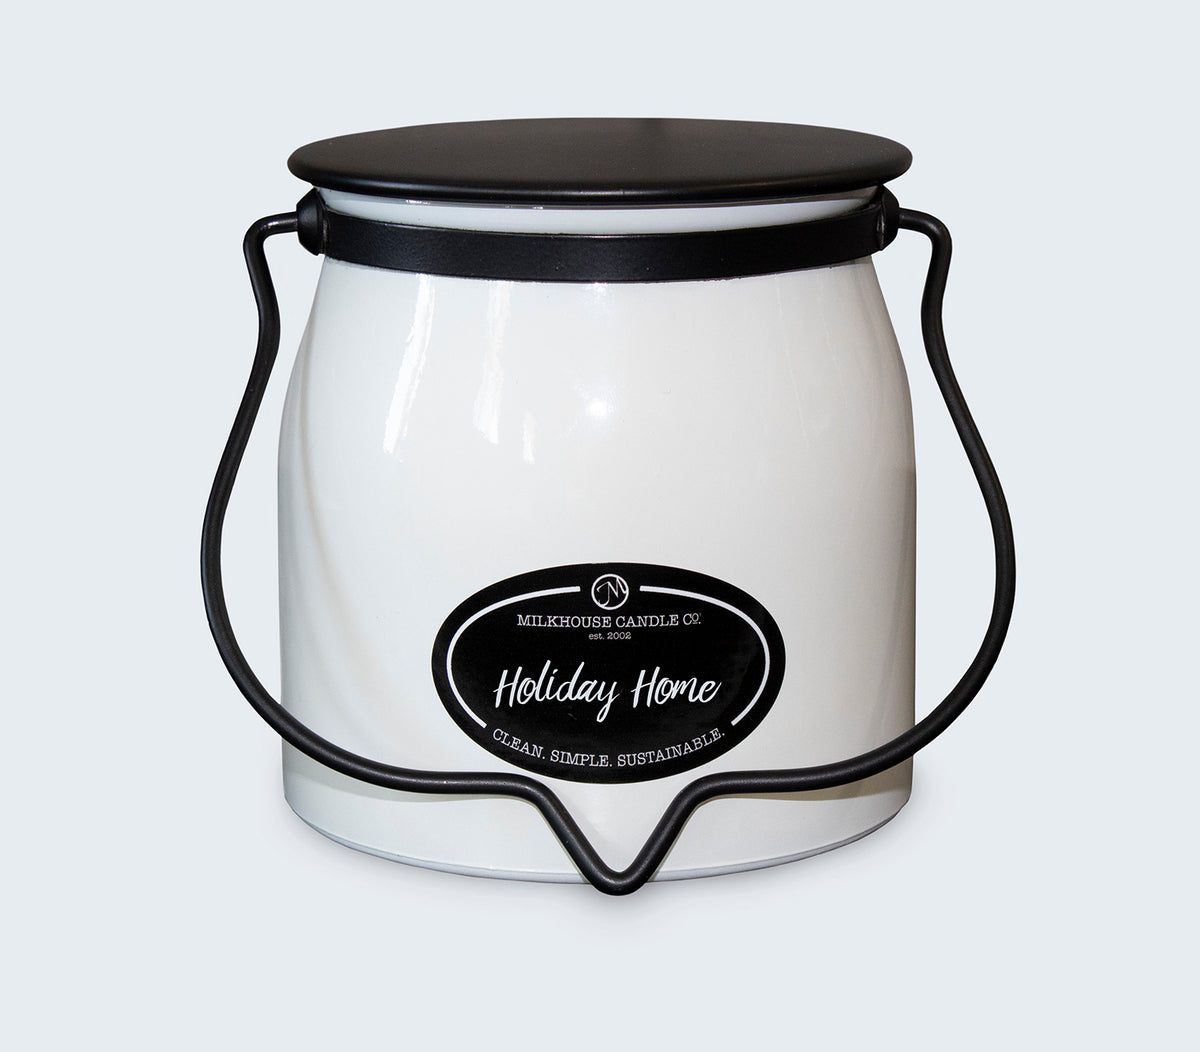 Holiday Home 16oz Milkhouse Candle